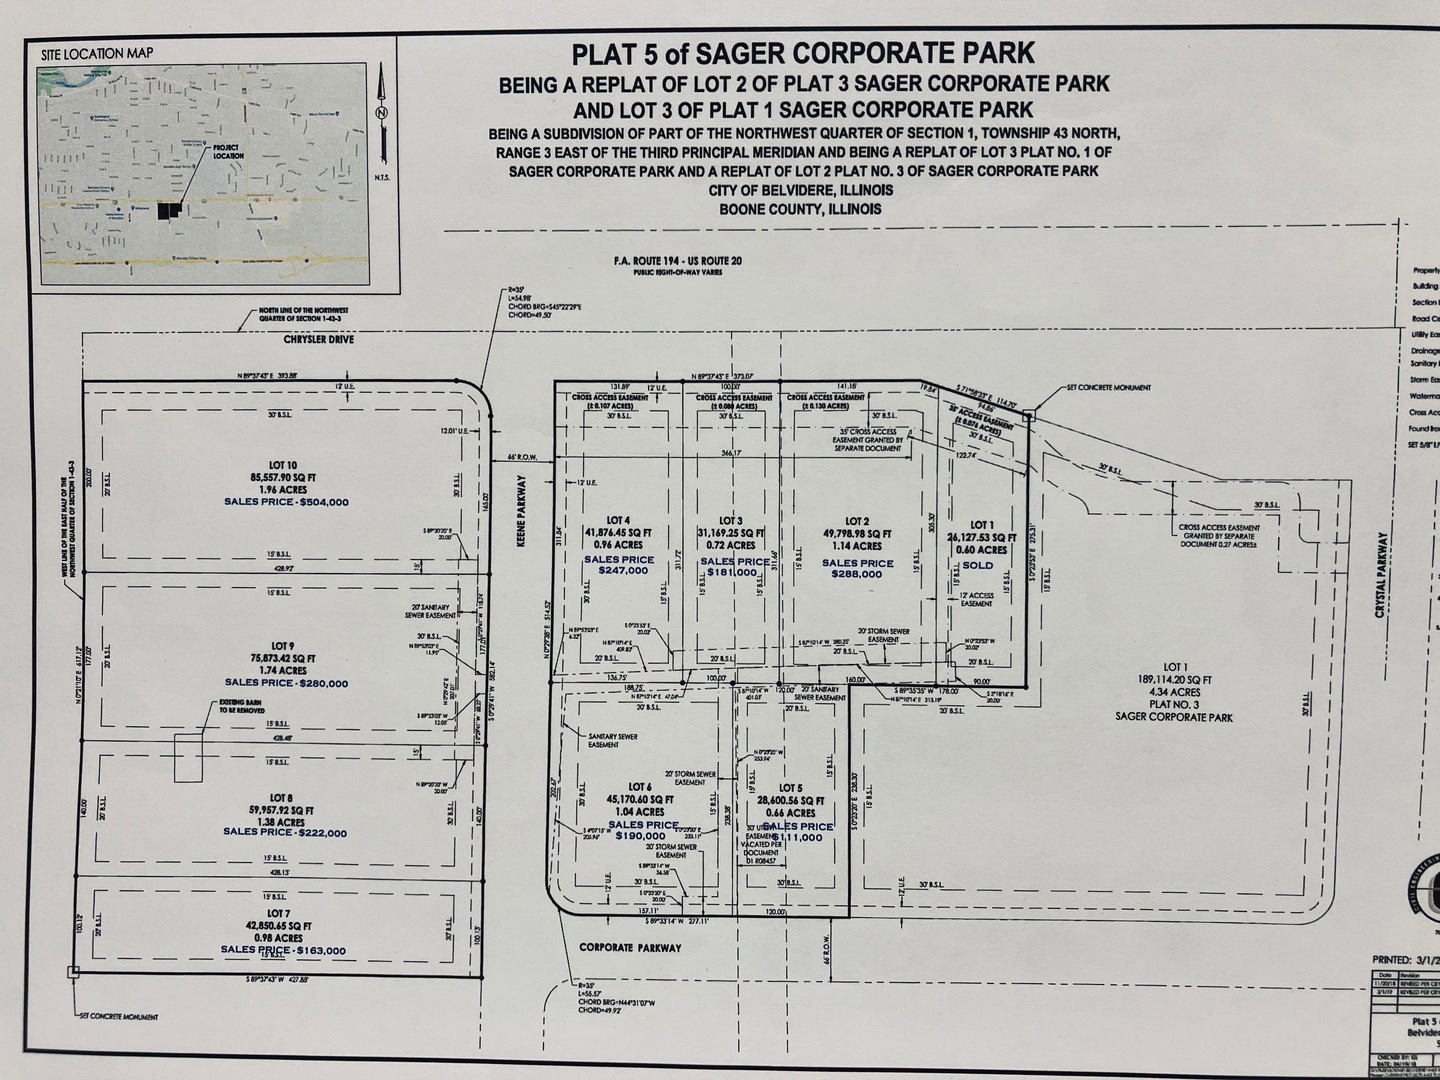 Main Photo For Sager Corporate Park - Lot 6